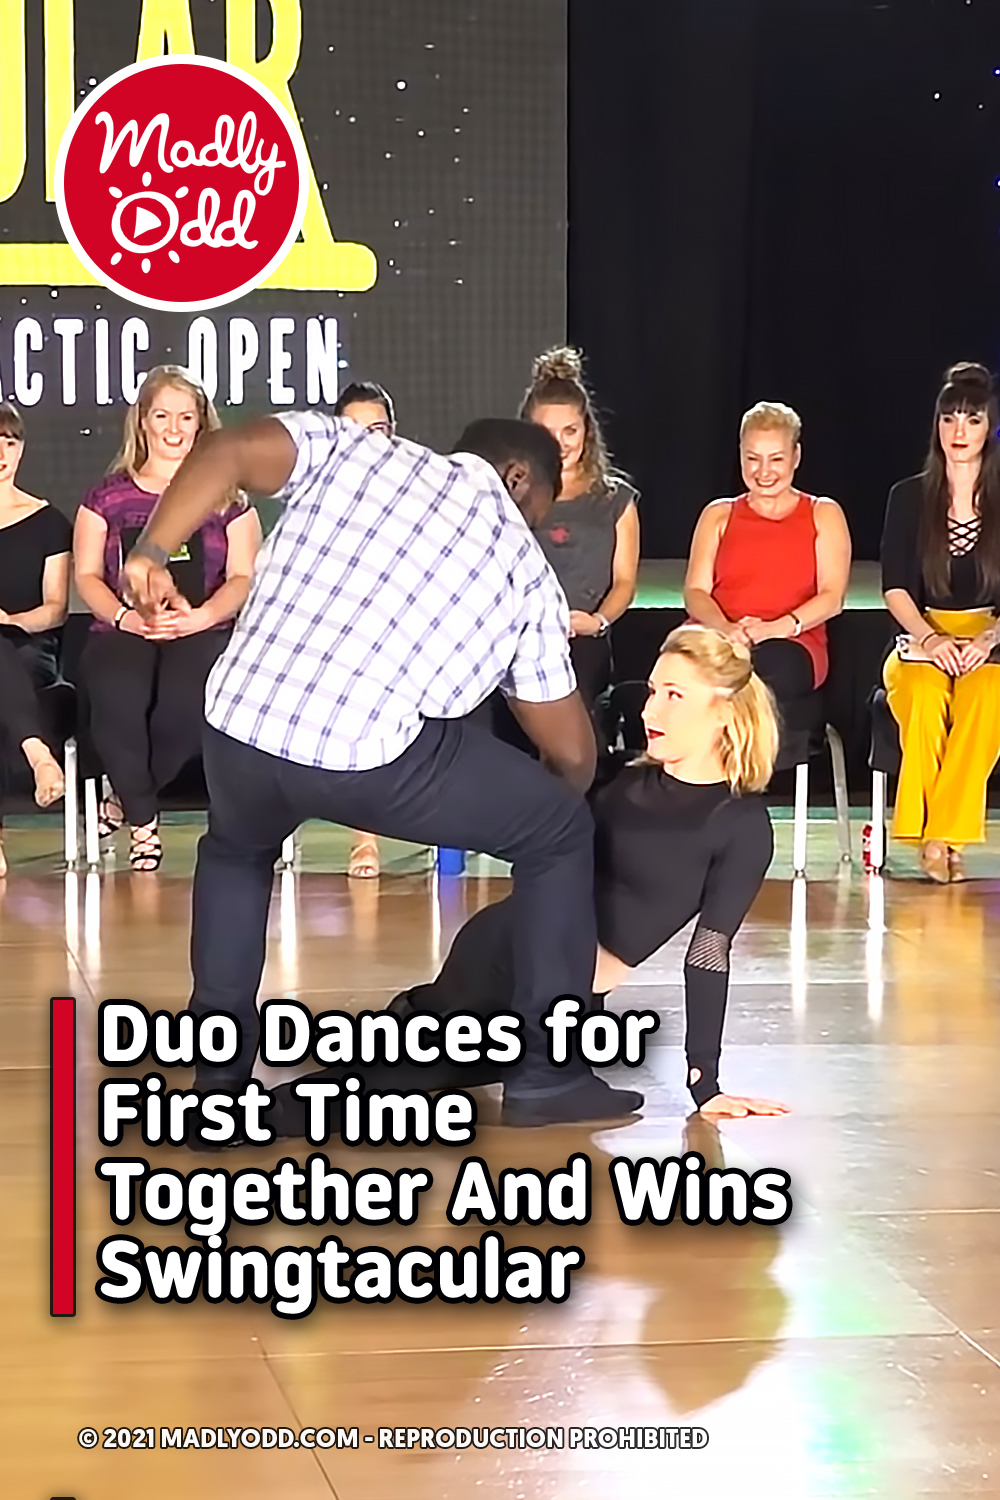 Duo Dances for First Time Together And Wins Swingtacular